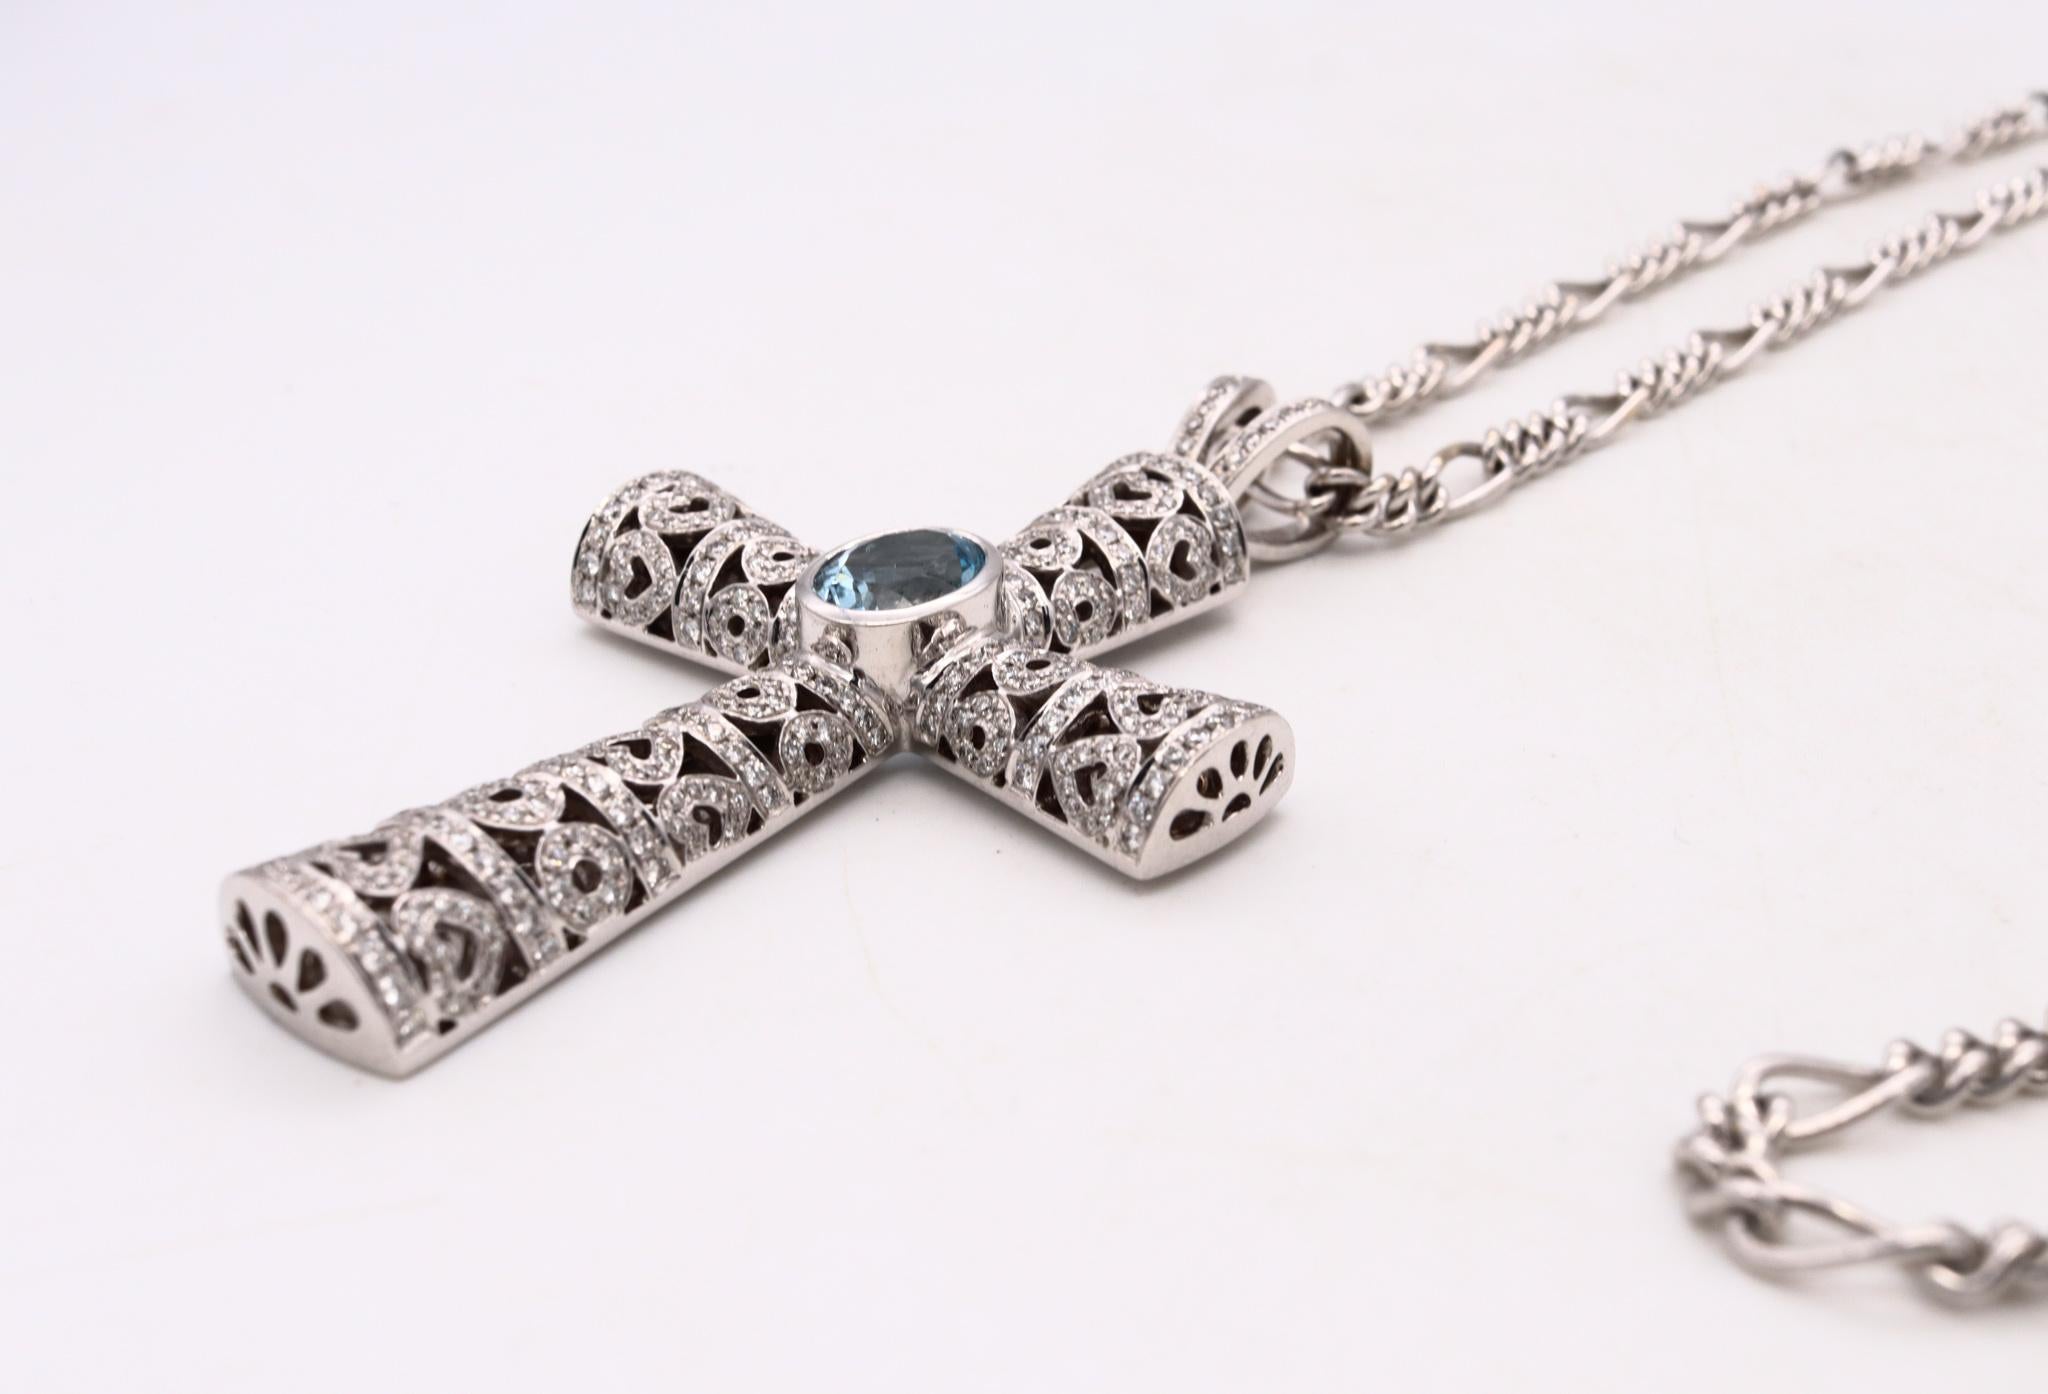 Women's or Men's Theo Fennel London Chain with Cross 18Kt with 6.29 Cts in Diamonds & Aquamarine